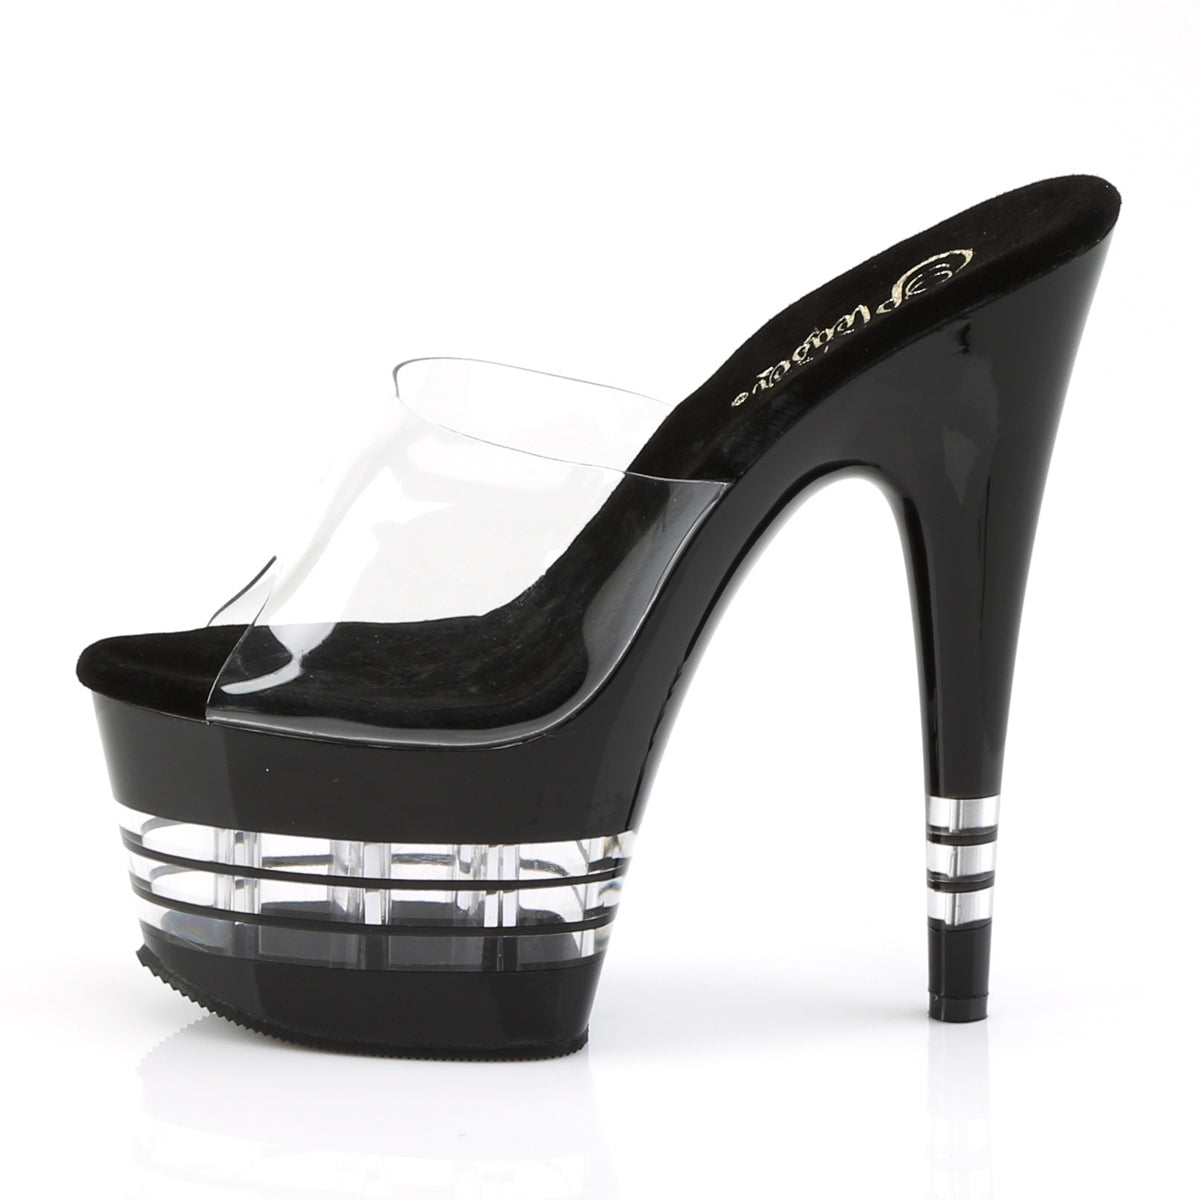 ADORE-701LN/C/B 7" PLEASER FAST DELIVERY 24-48h